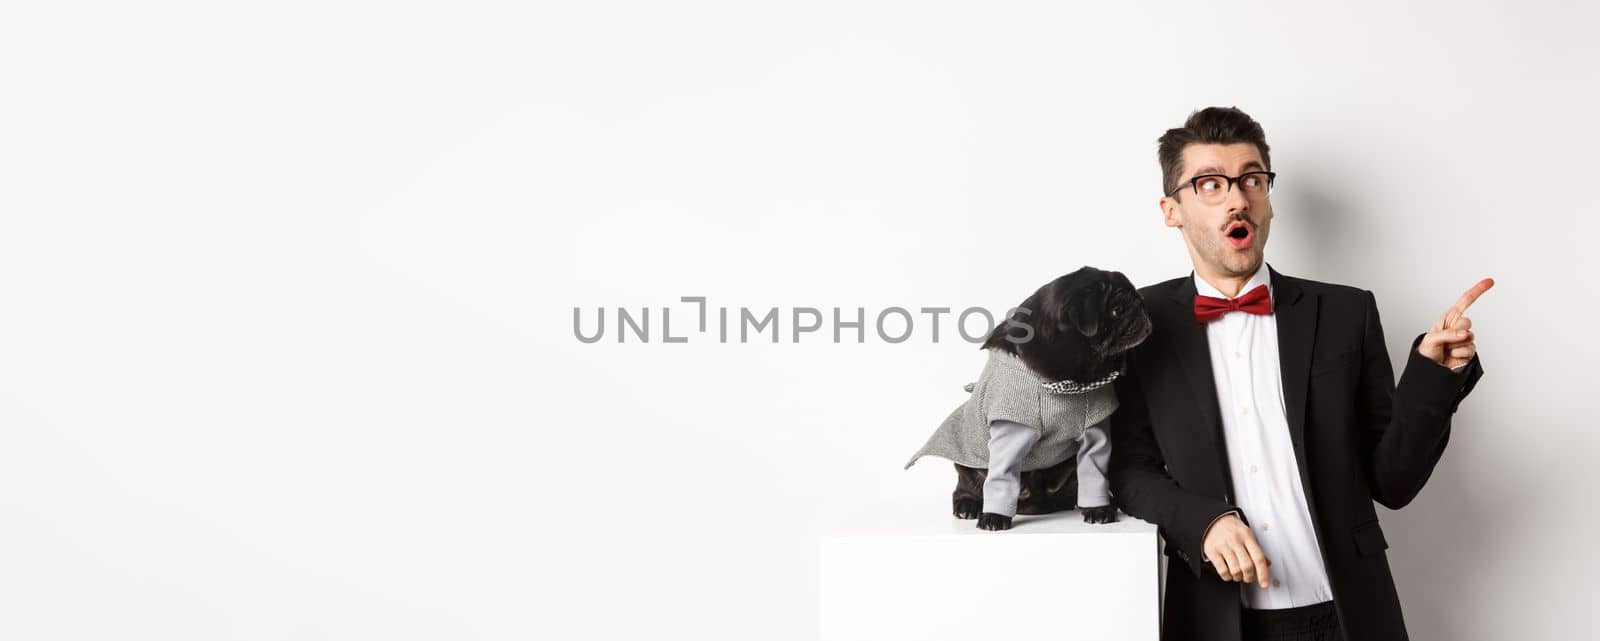 Animals, party and celebration concept. Amazed young man and black dog in costumes staring right at copy space, standing against white background.